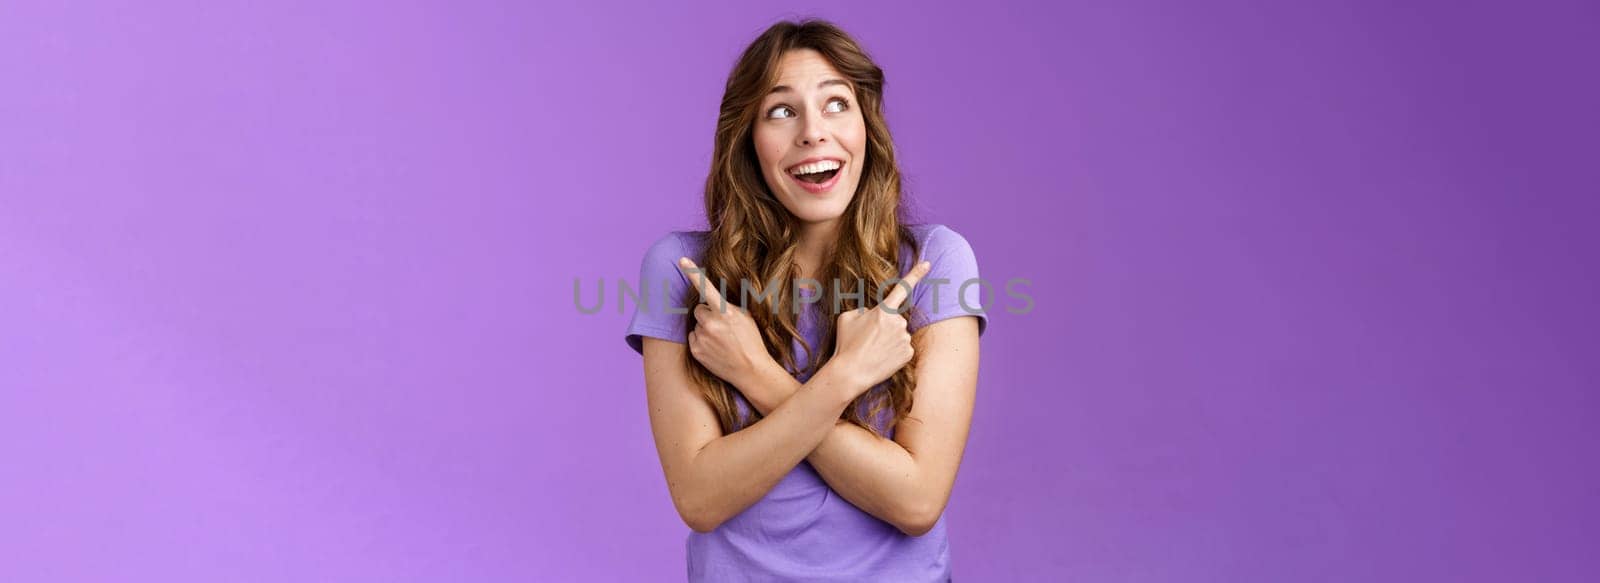 Happy cheerful lively curly girl smiling broadly receive awesome opportunity study abroad choosing universities cross hands sideways pointing left right grinning amused entertained purple wall.